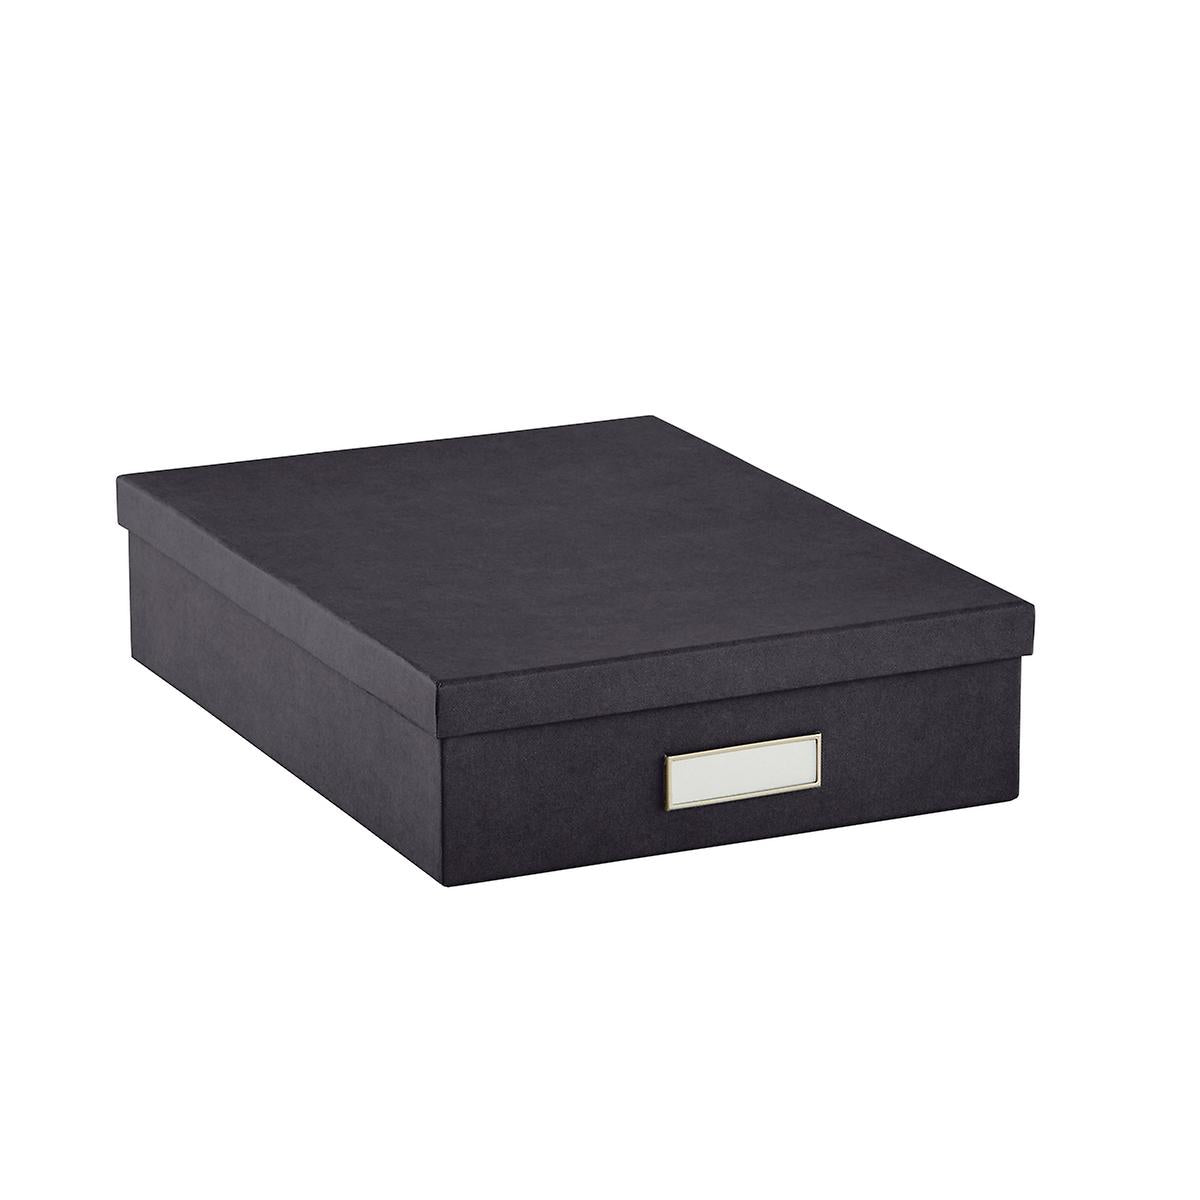 Archival Box | Stationery Box | Acid Free Storage | Black, Navy, White | Paper | Gold Engraved Name Included